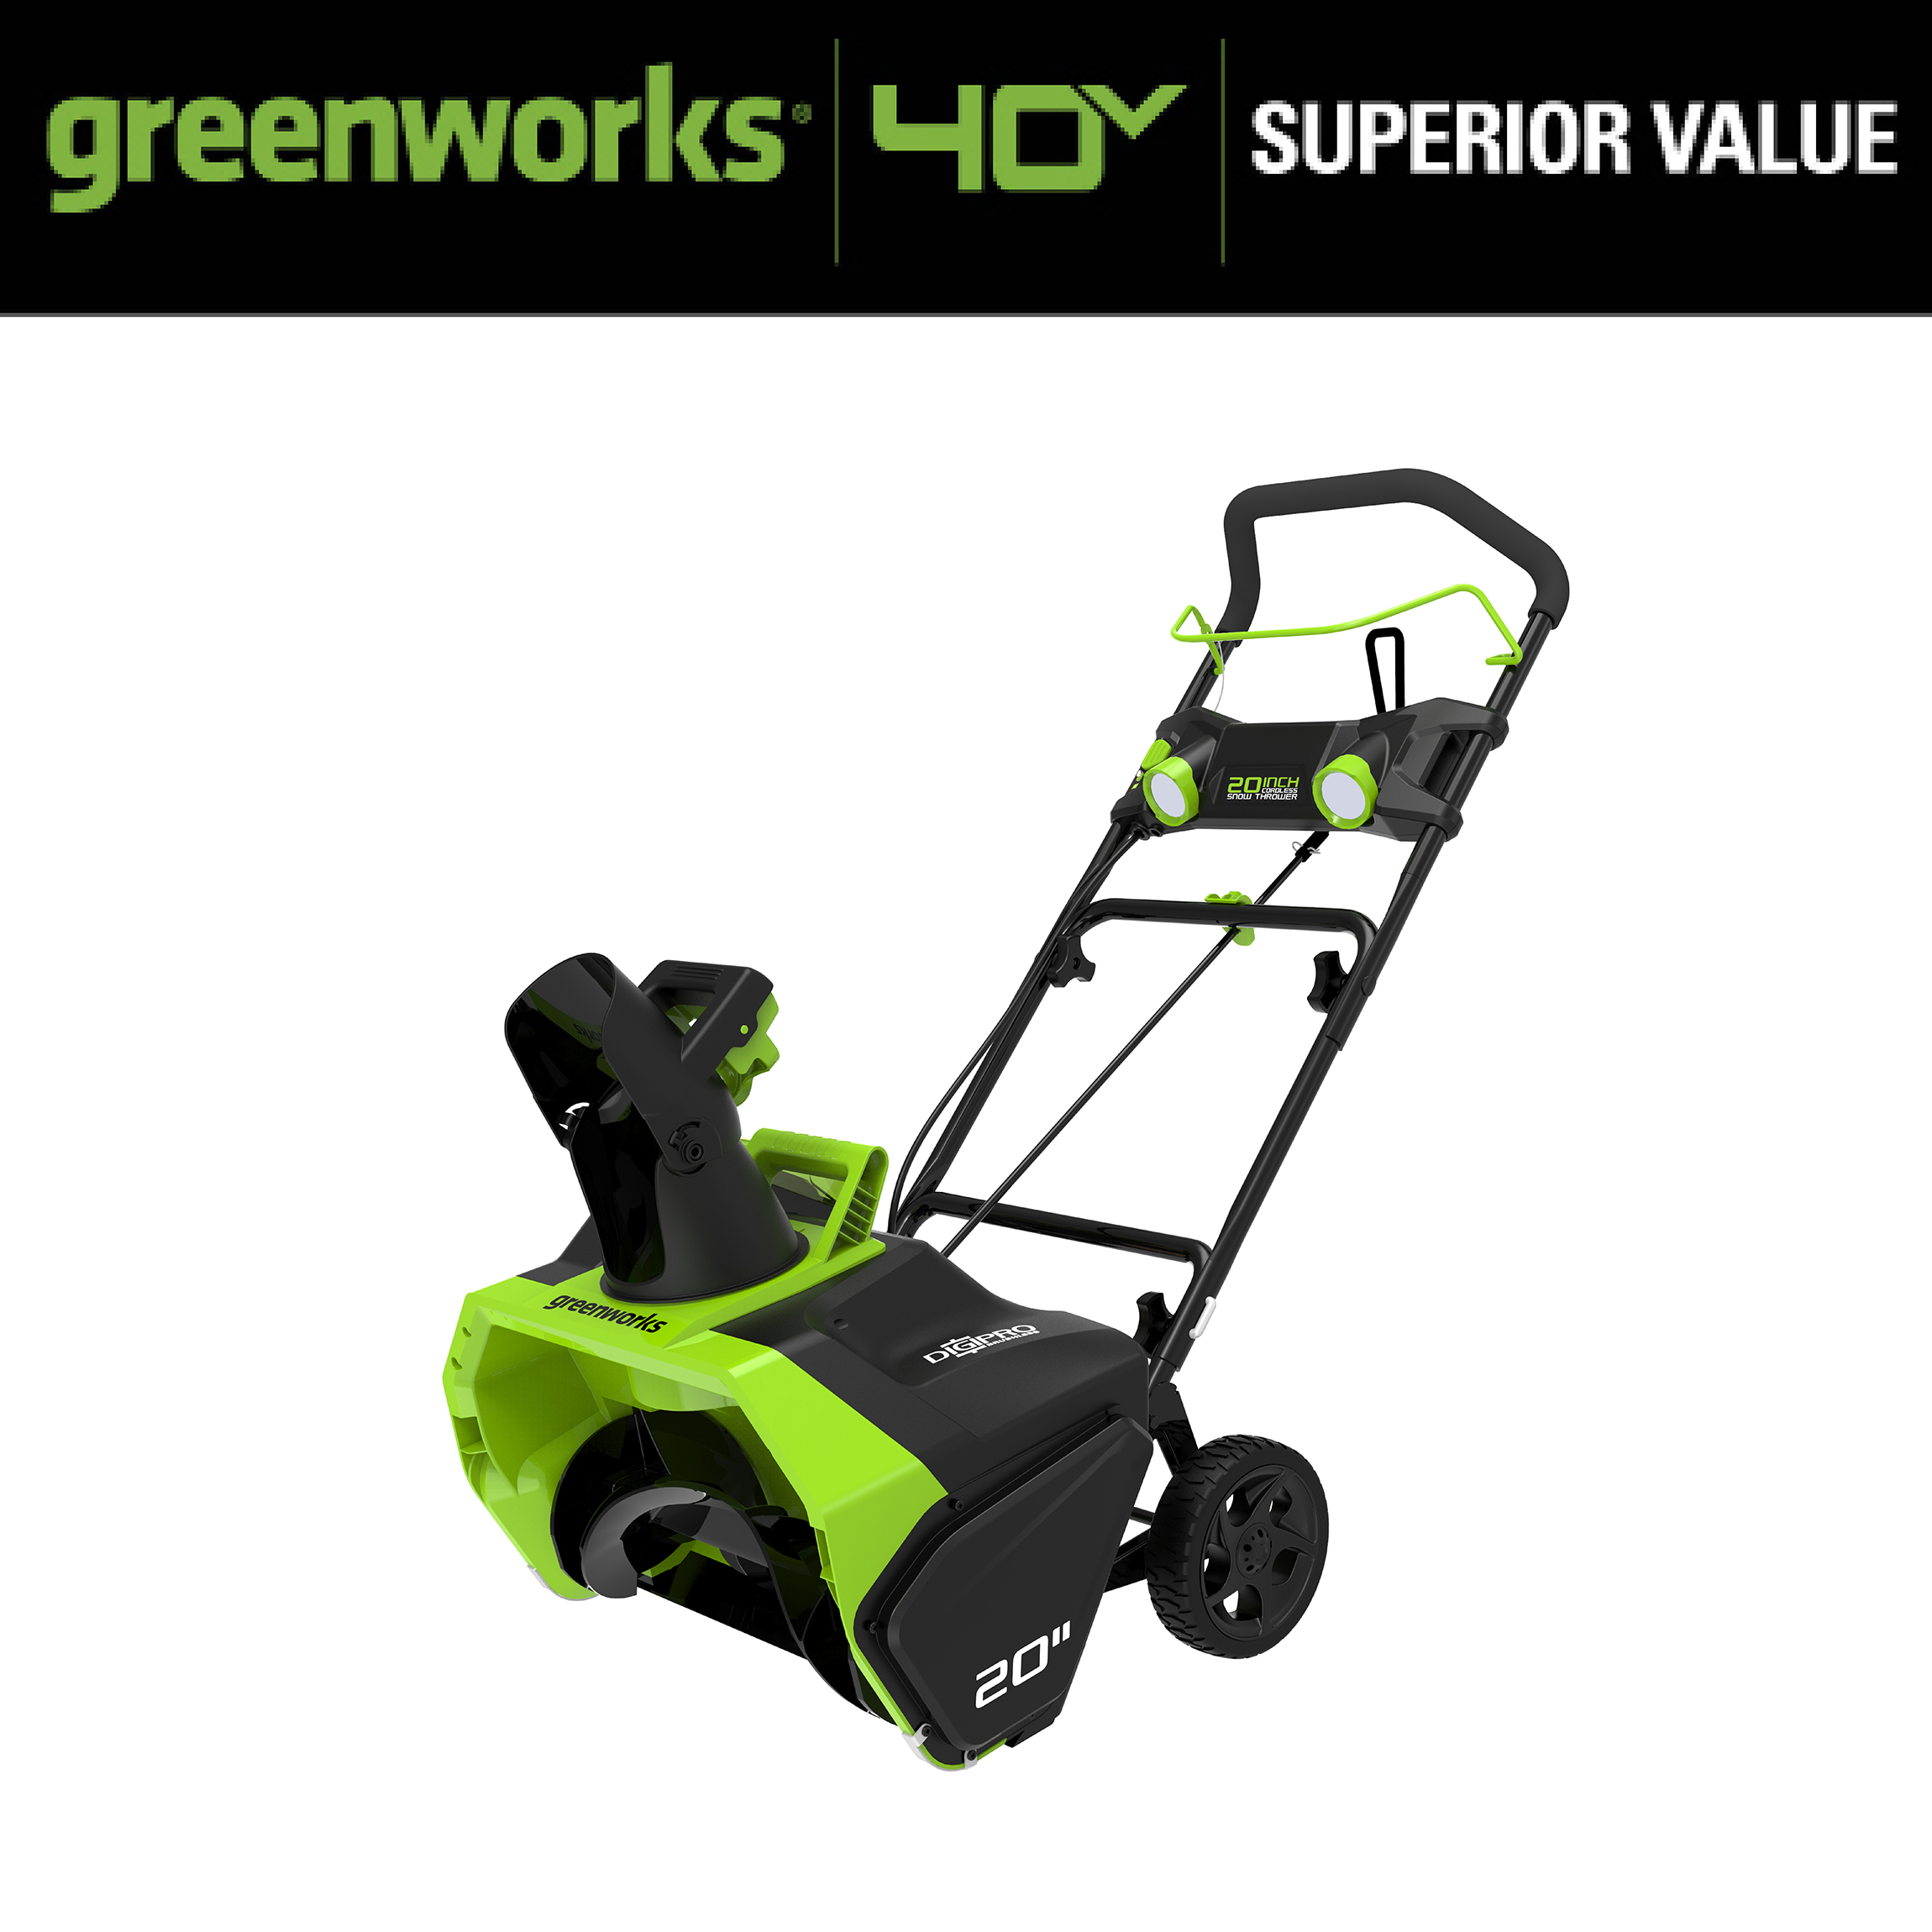 Greenworks 40V 20-inch Cordless Brushless Snow Blower with 4.0 Ah Battery and Charger, 26272 - image 3 of 9